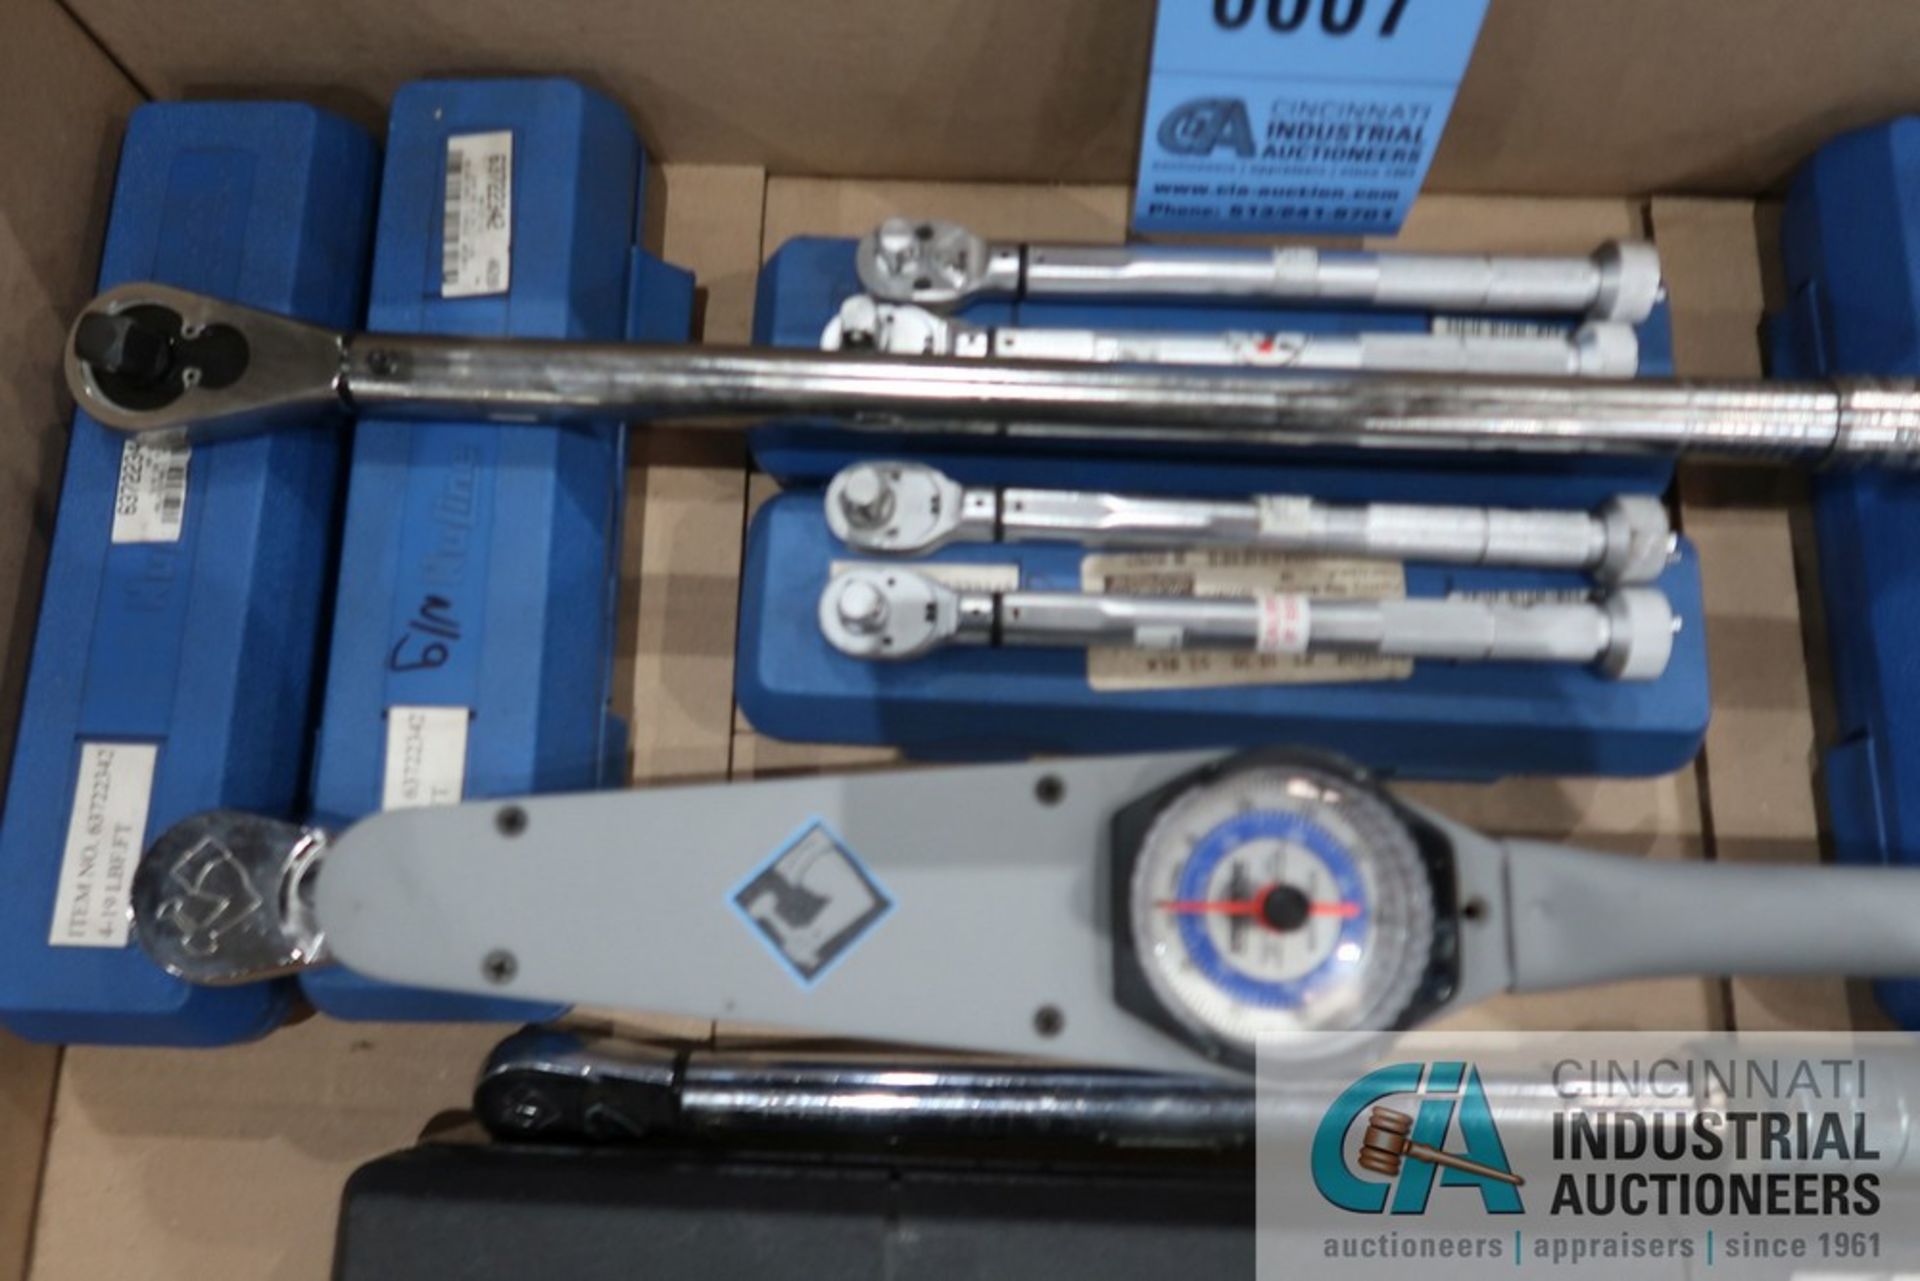 (LOT) MISC. FT. LBS. & DRIVE TORQUE WRENCHES - Image 2 of 3